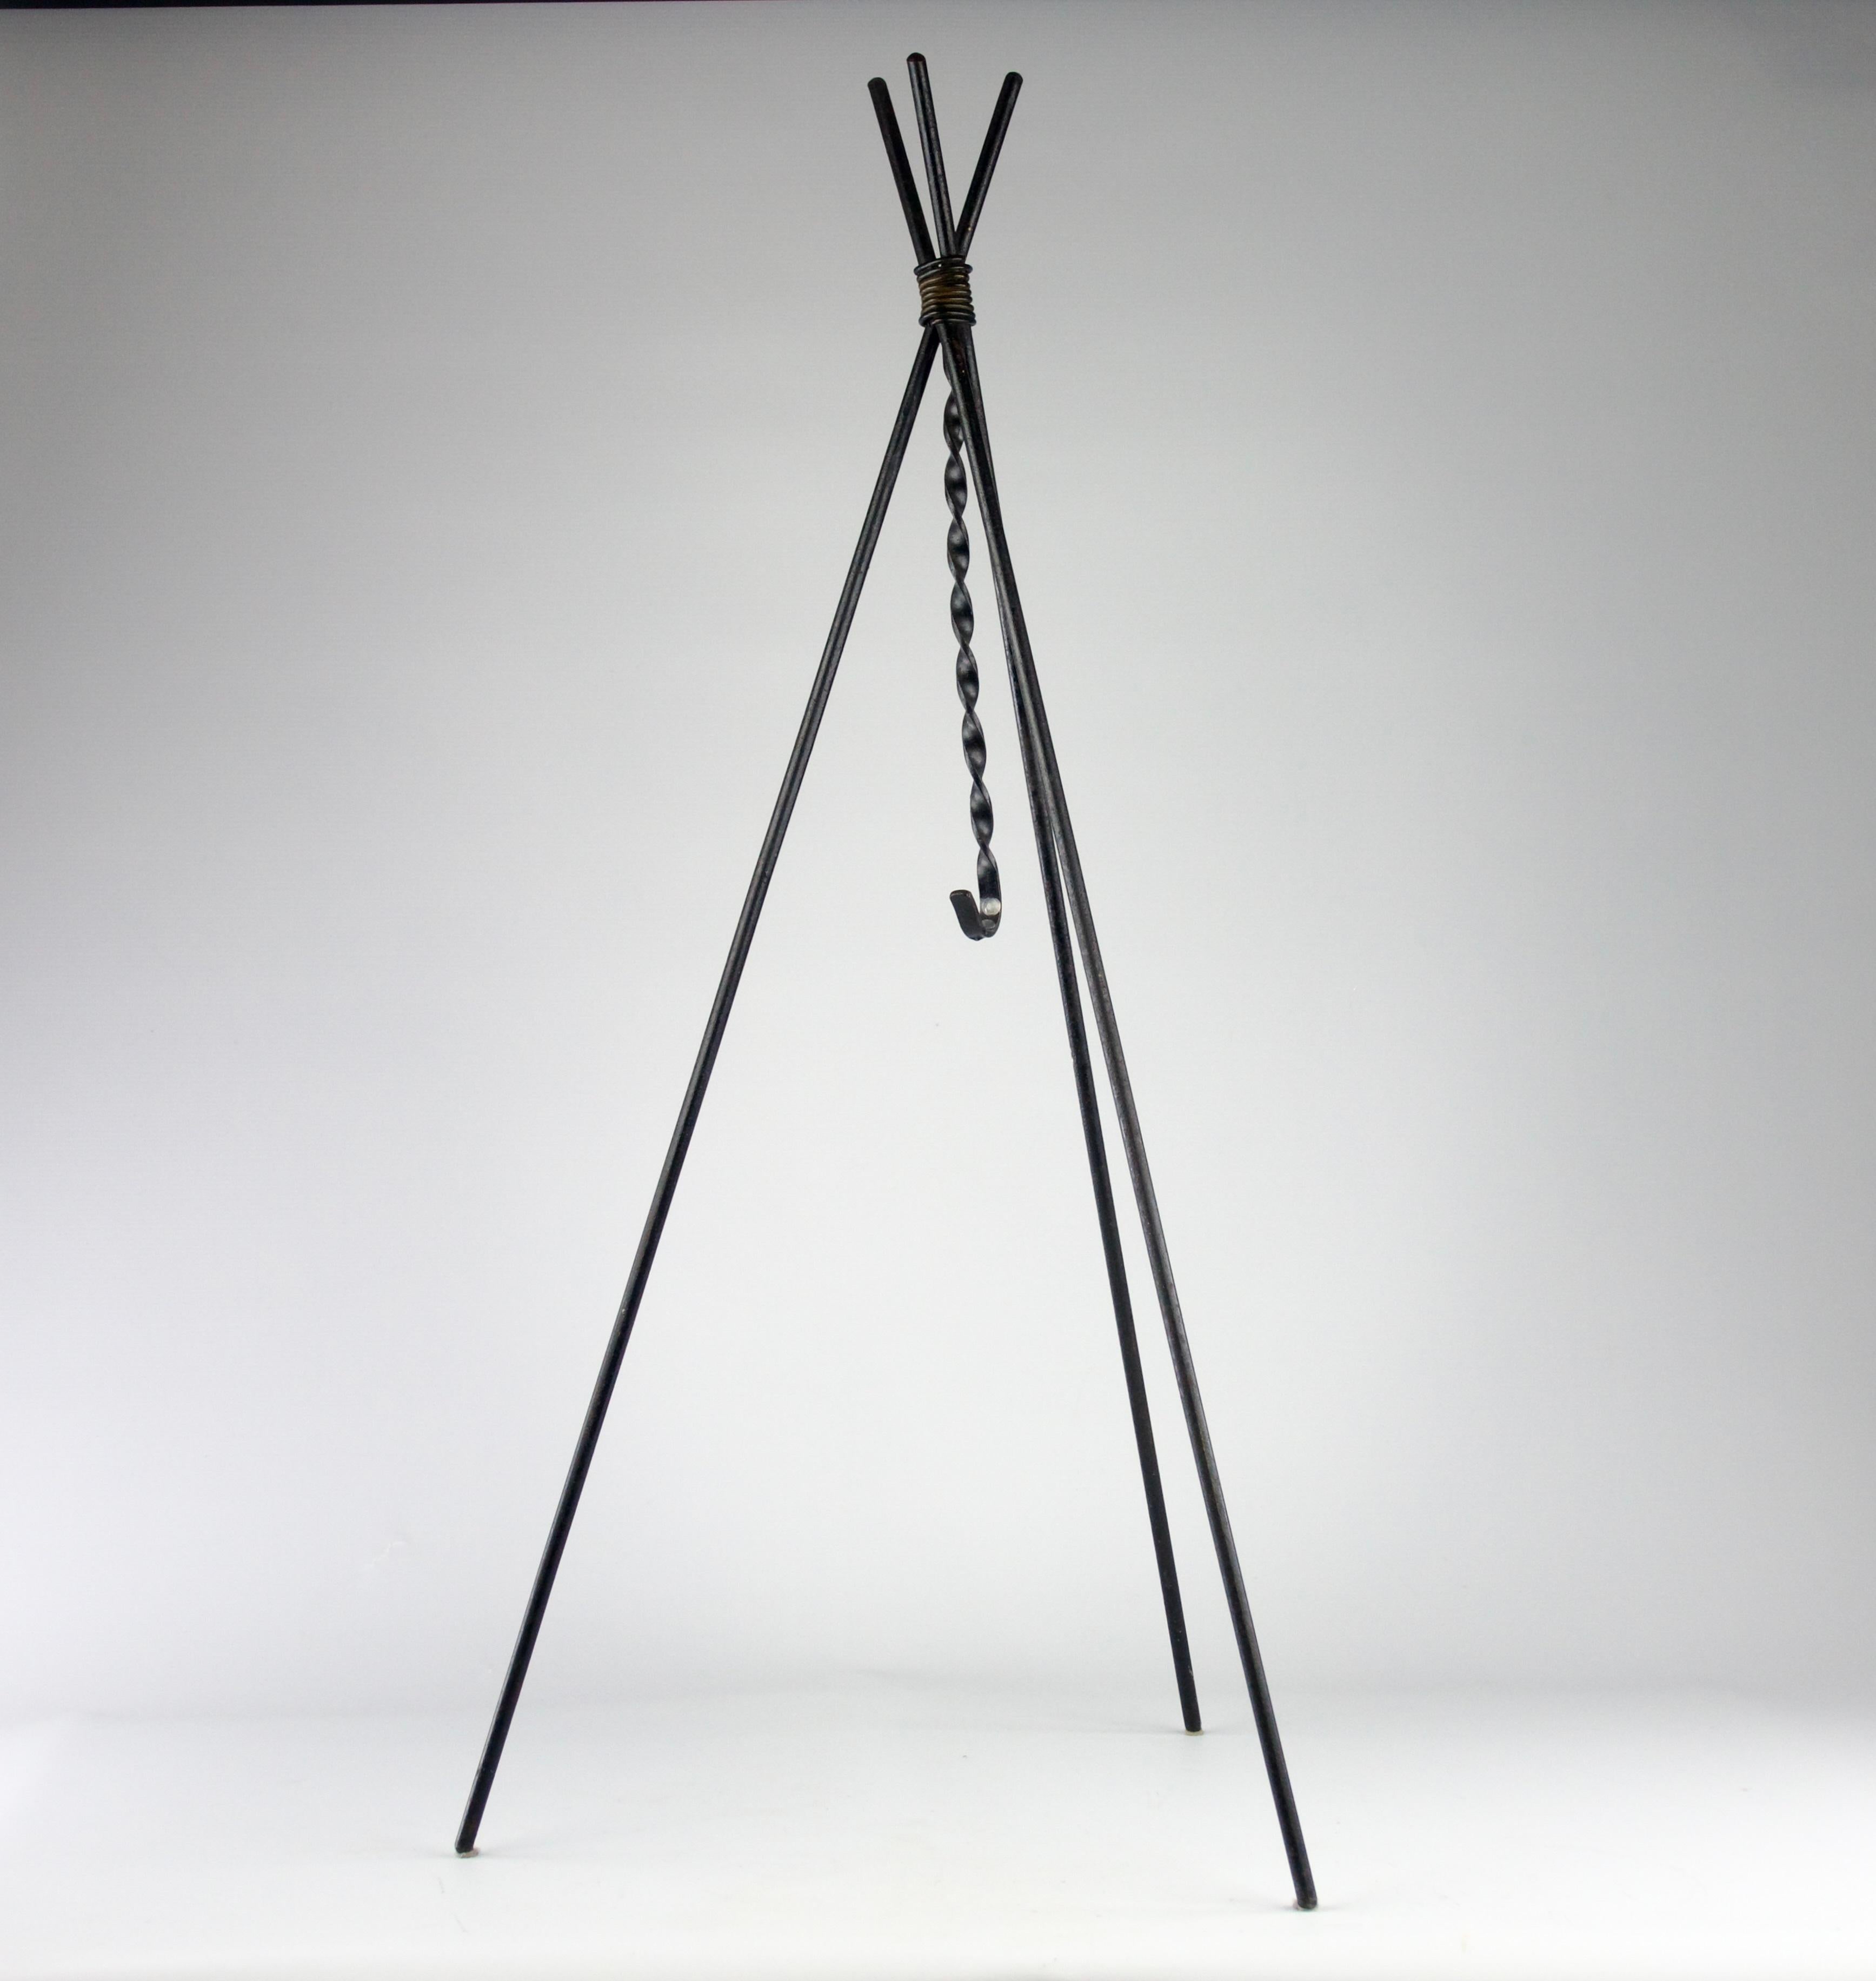 Mid-20th Century Ceramic and Iron Cooking Pot on Tripod Stand, 1950s For Sale